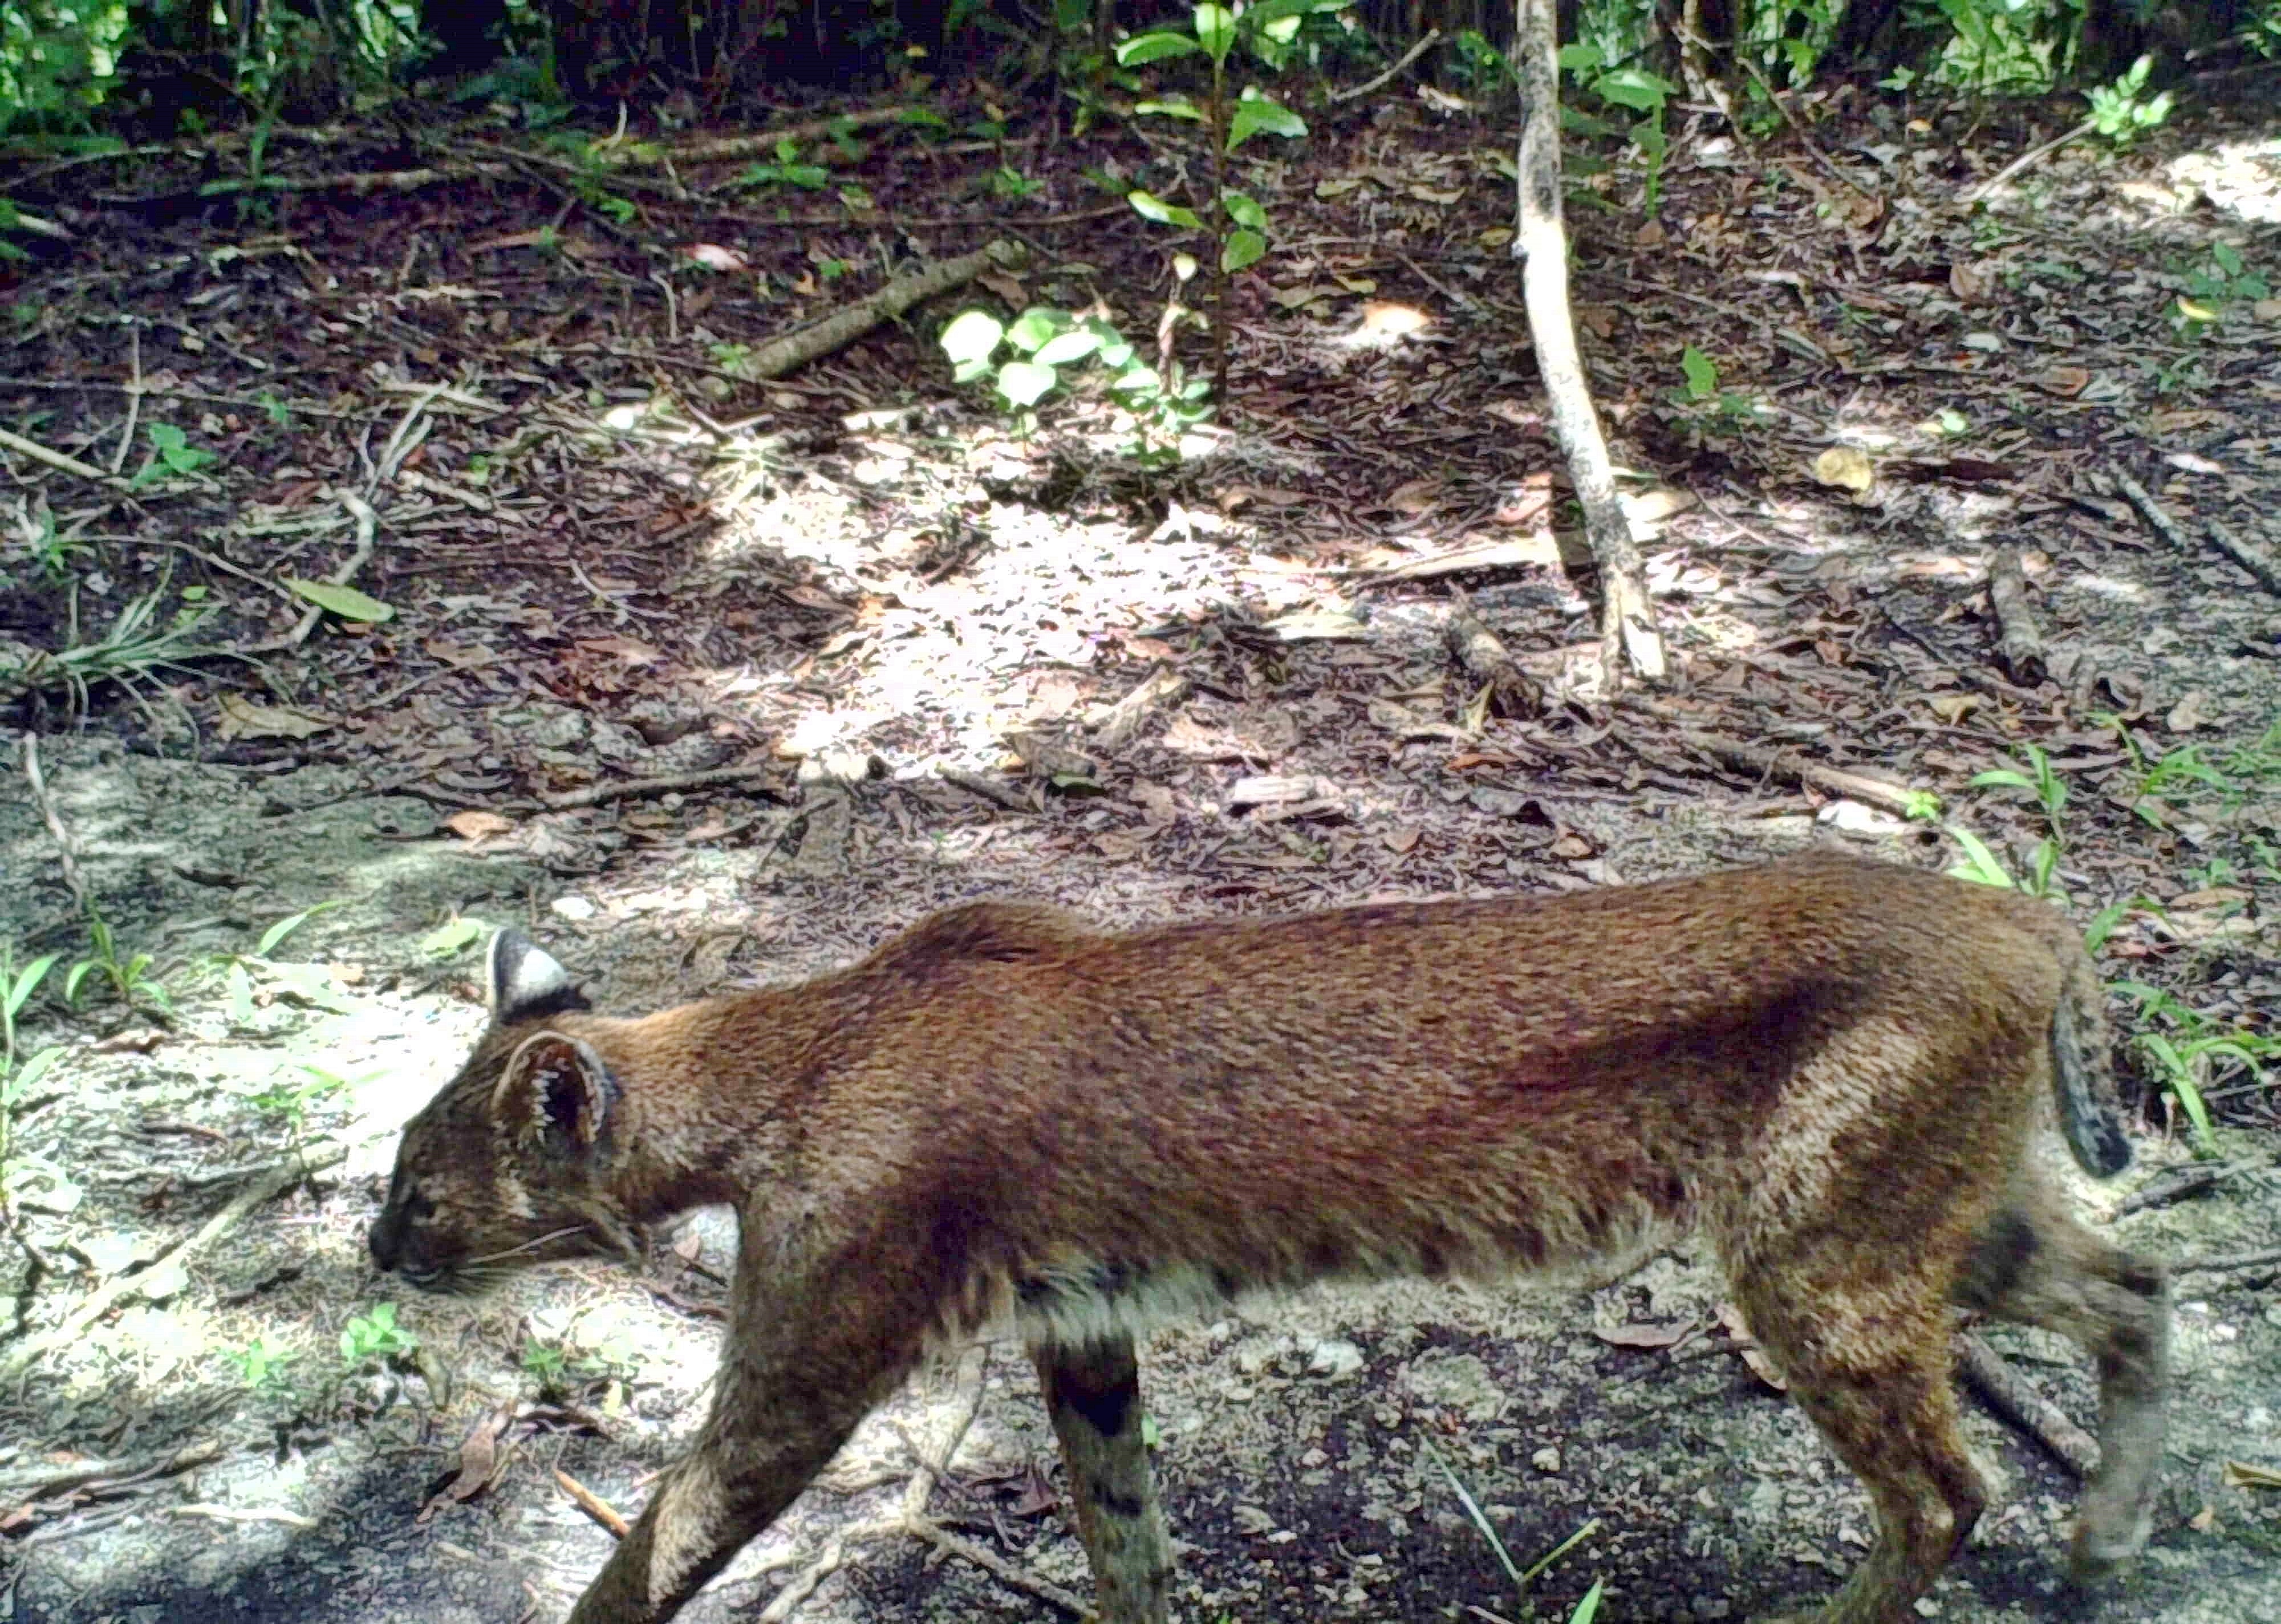 Florida bobcat coat coloration and markings in summer - note the reddish-brown tones